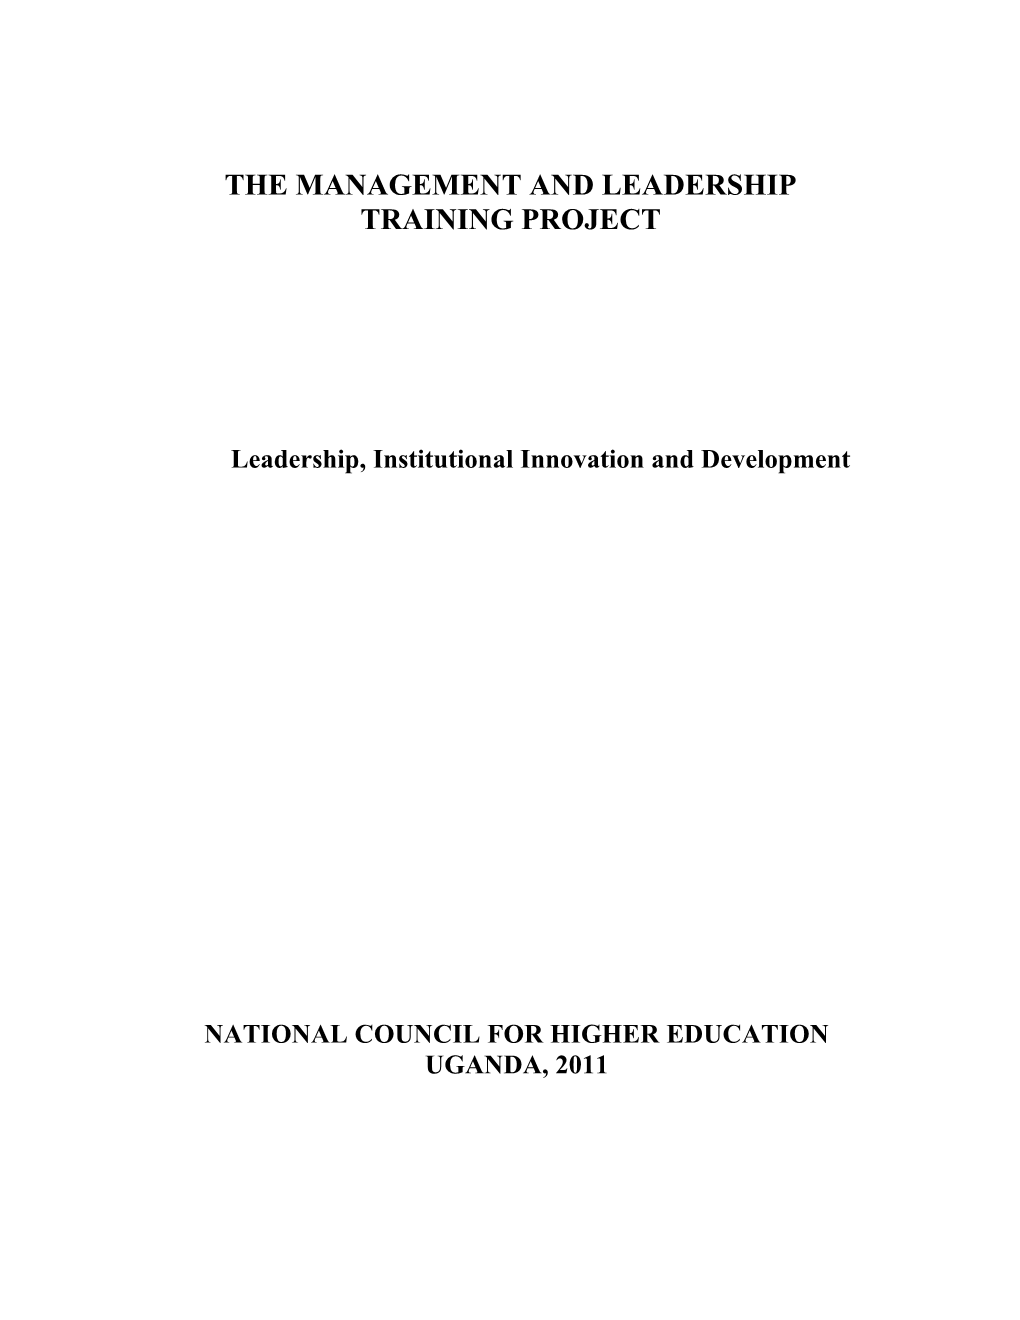 The Management and Leadership Training Project